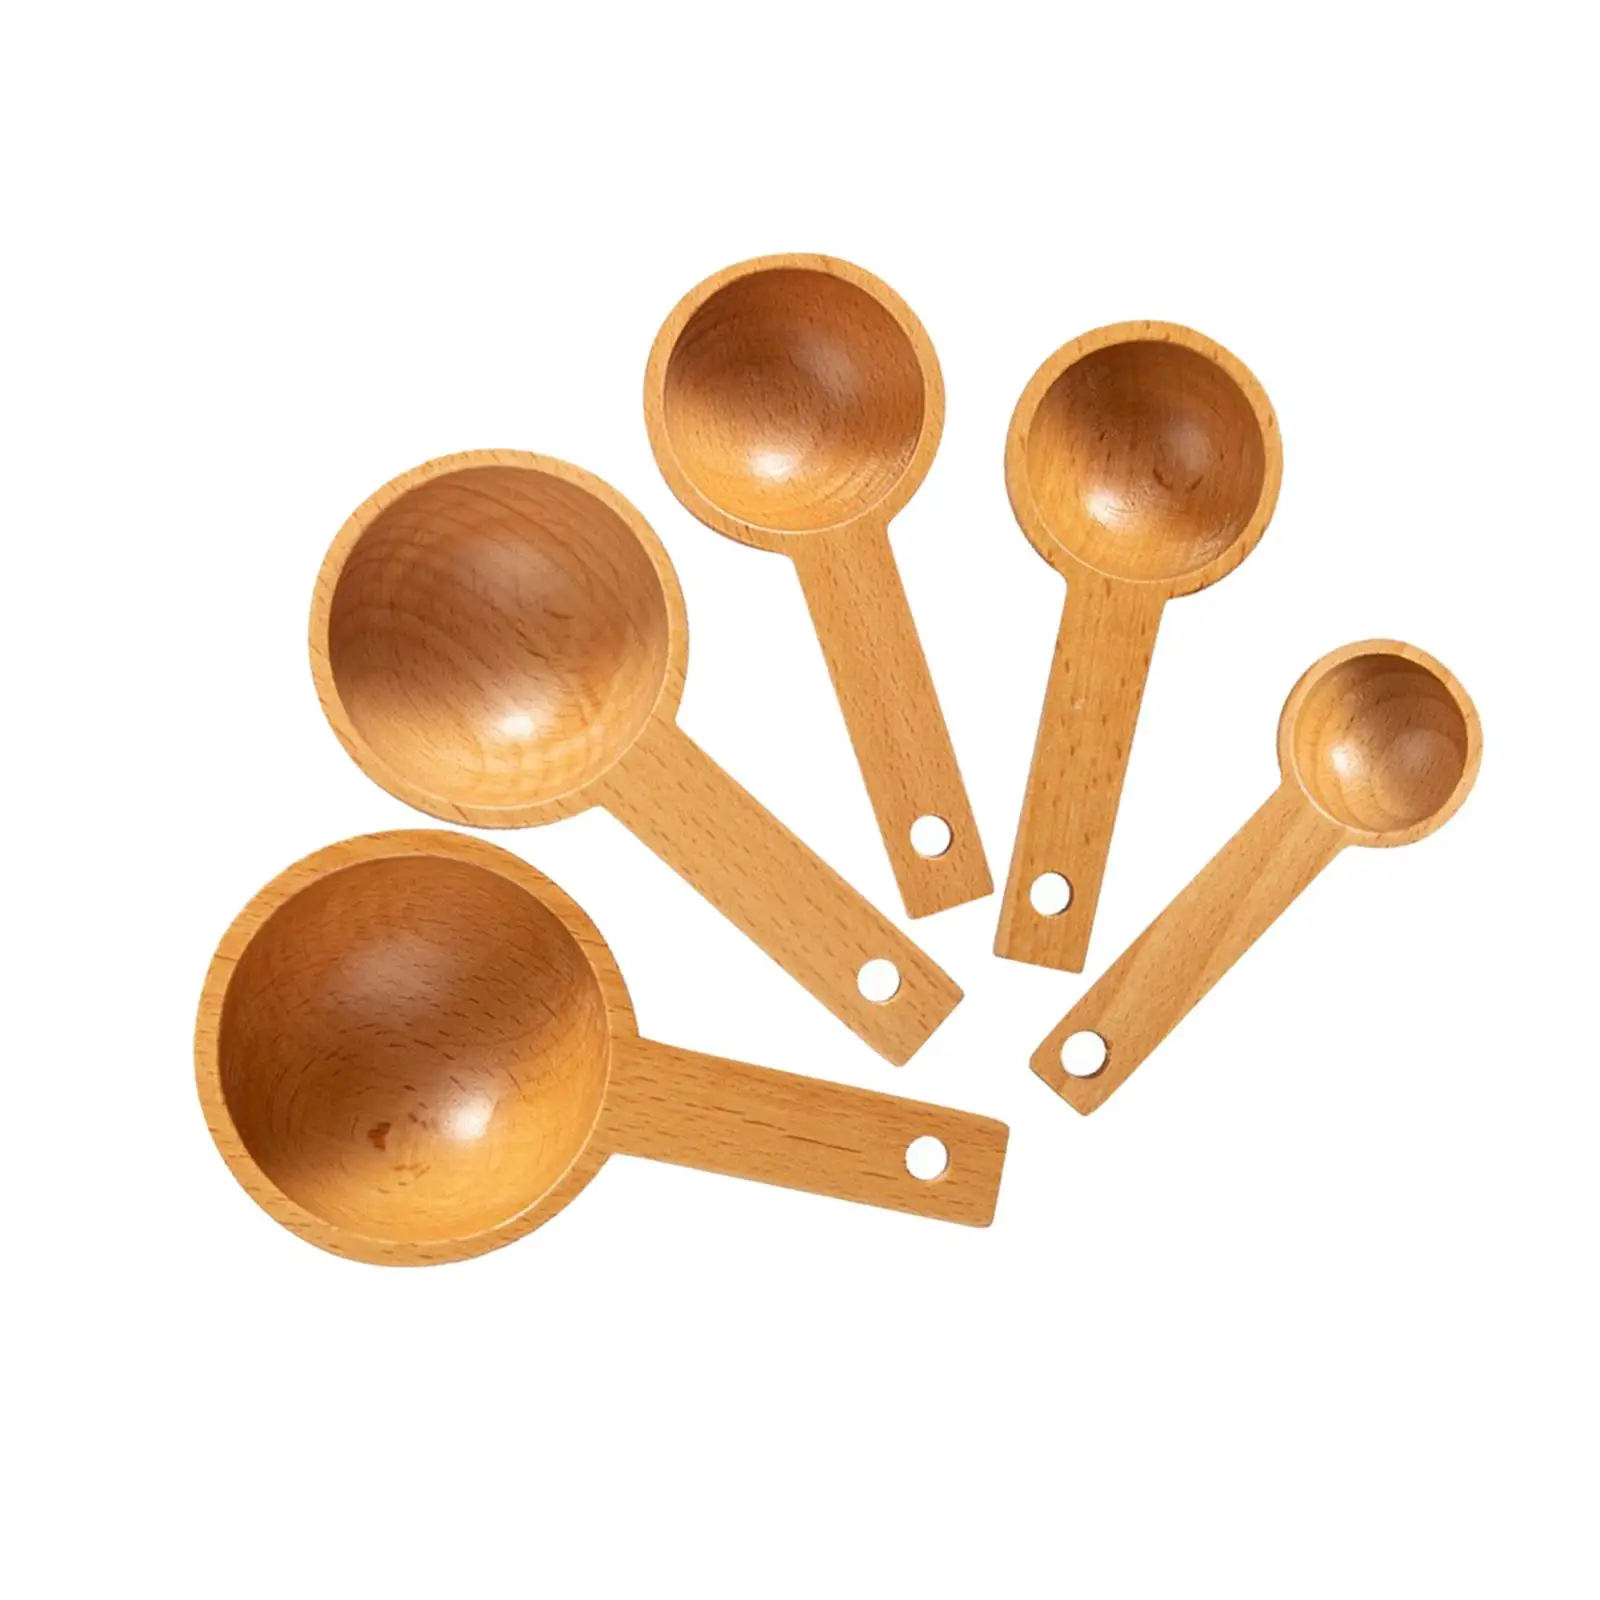 5 Pieces Wood Measuring Spoons Accessories Coffee Spoon Flour Scoop for Dry Liquid Food